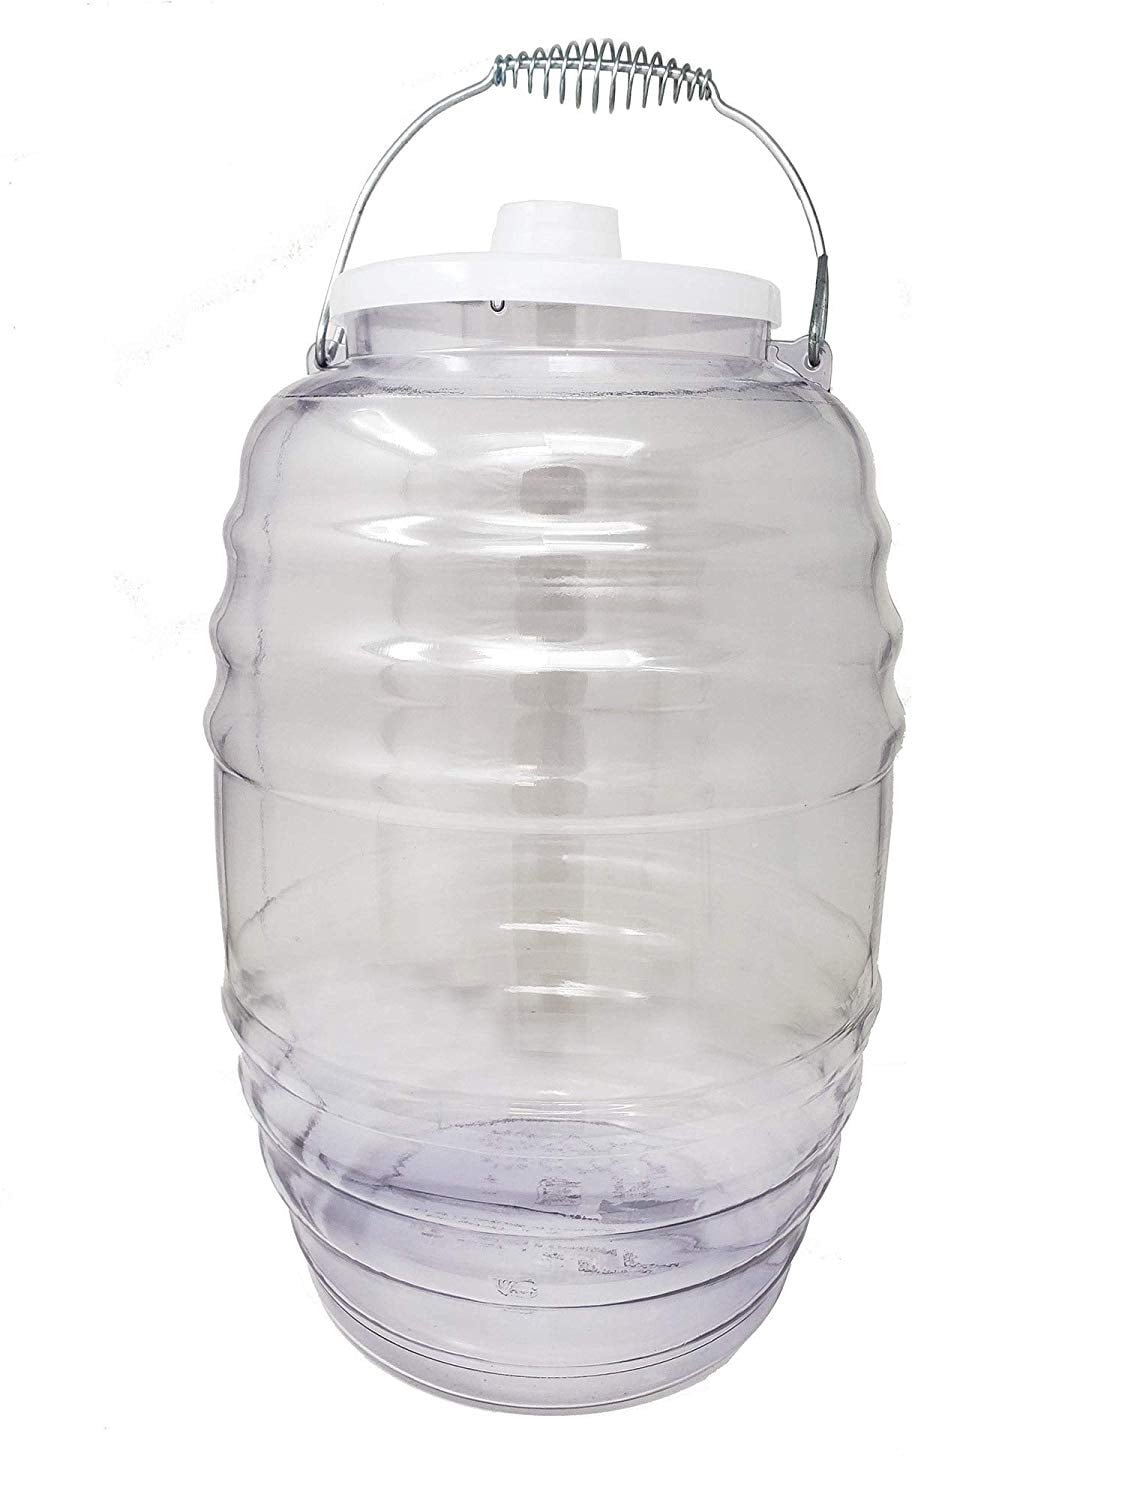 5 Gallon Glass Barrel Jar Vitrolero Aguas Frescas Water Juice Beverage Container With Lid Fiesta Catering Party Wedding